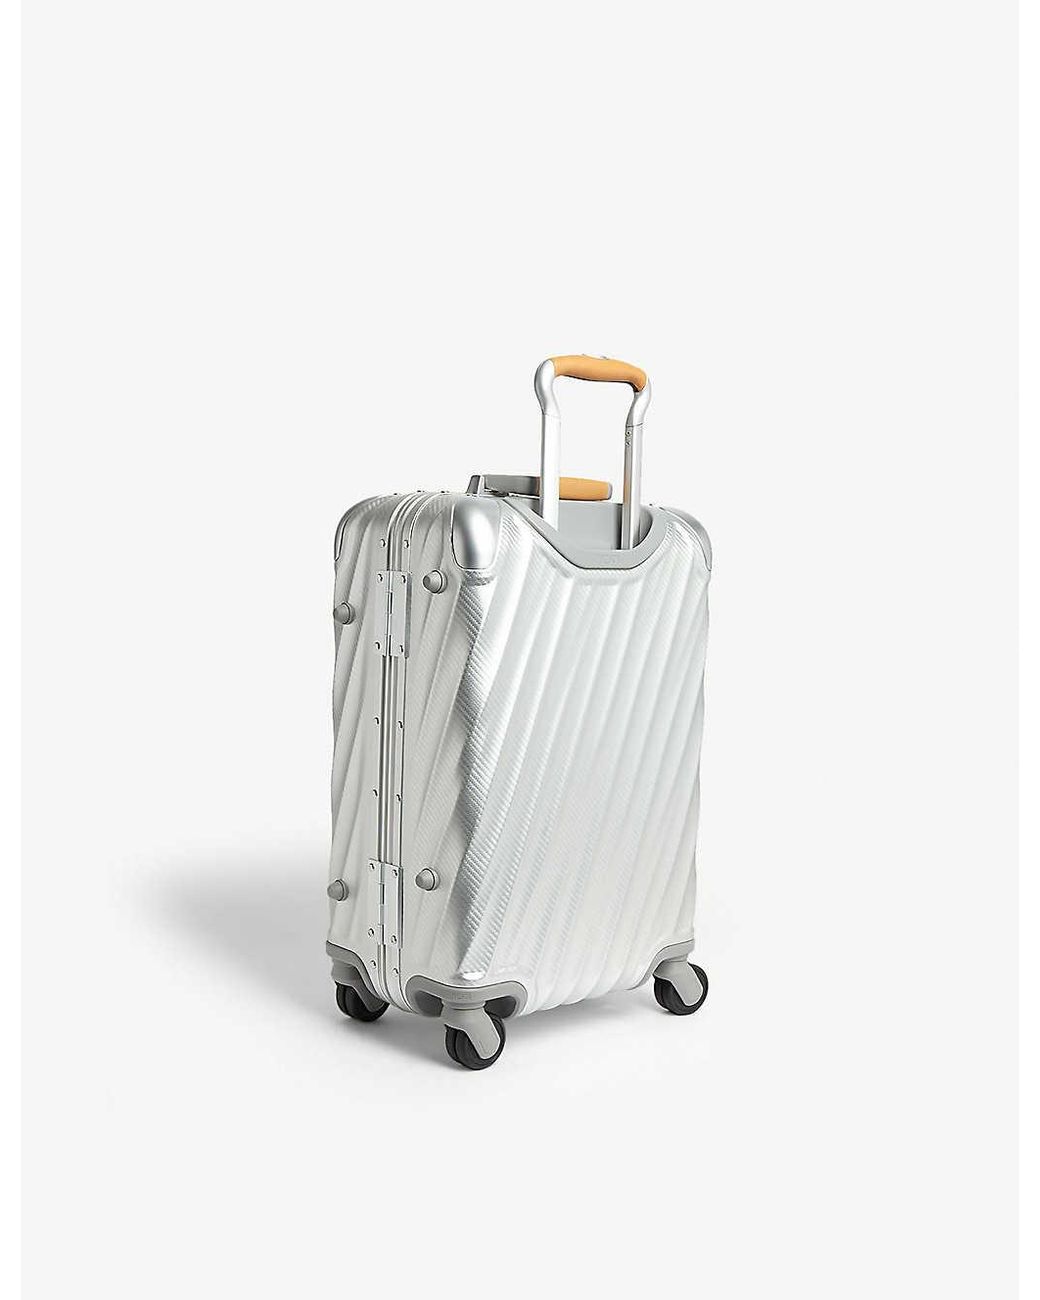 for Men Mens Bags Luggage and suitcases Save 7% Metallic Tumi Synthetic 19 Degree Aluminium Worldwide Trip Packing Case in Silver 